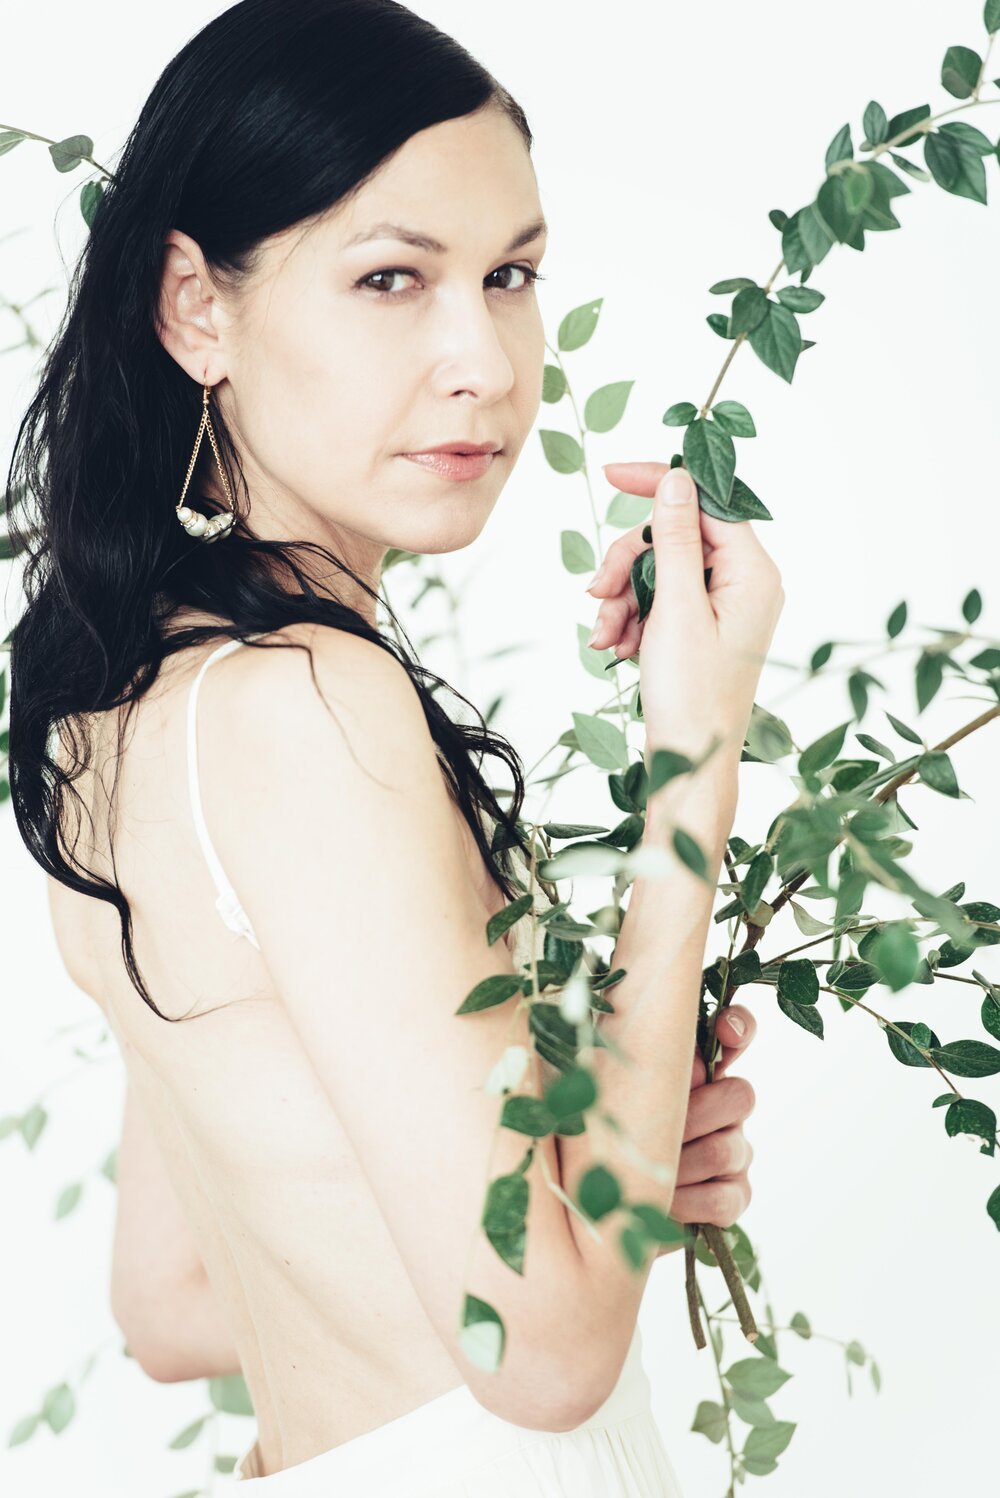 A woman in a white dress gracefully holds a plant, showcasing elegance and nature&#39;s beauty.jpg